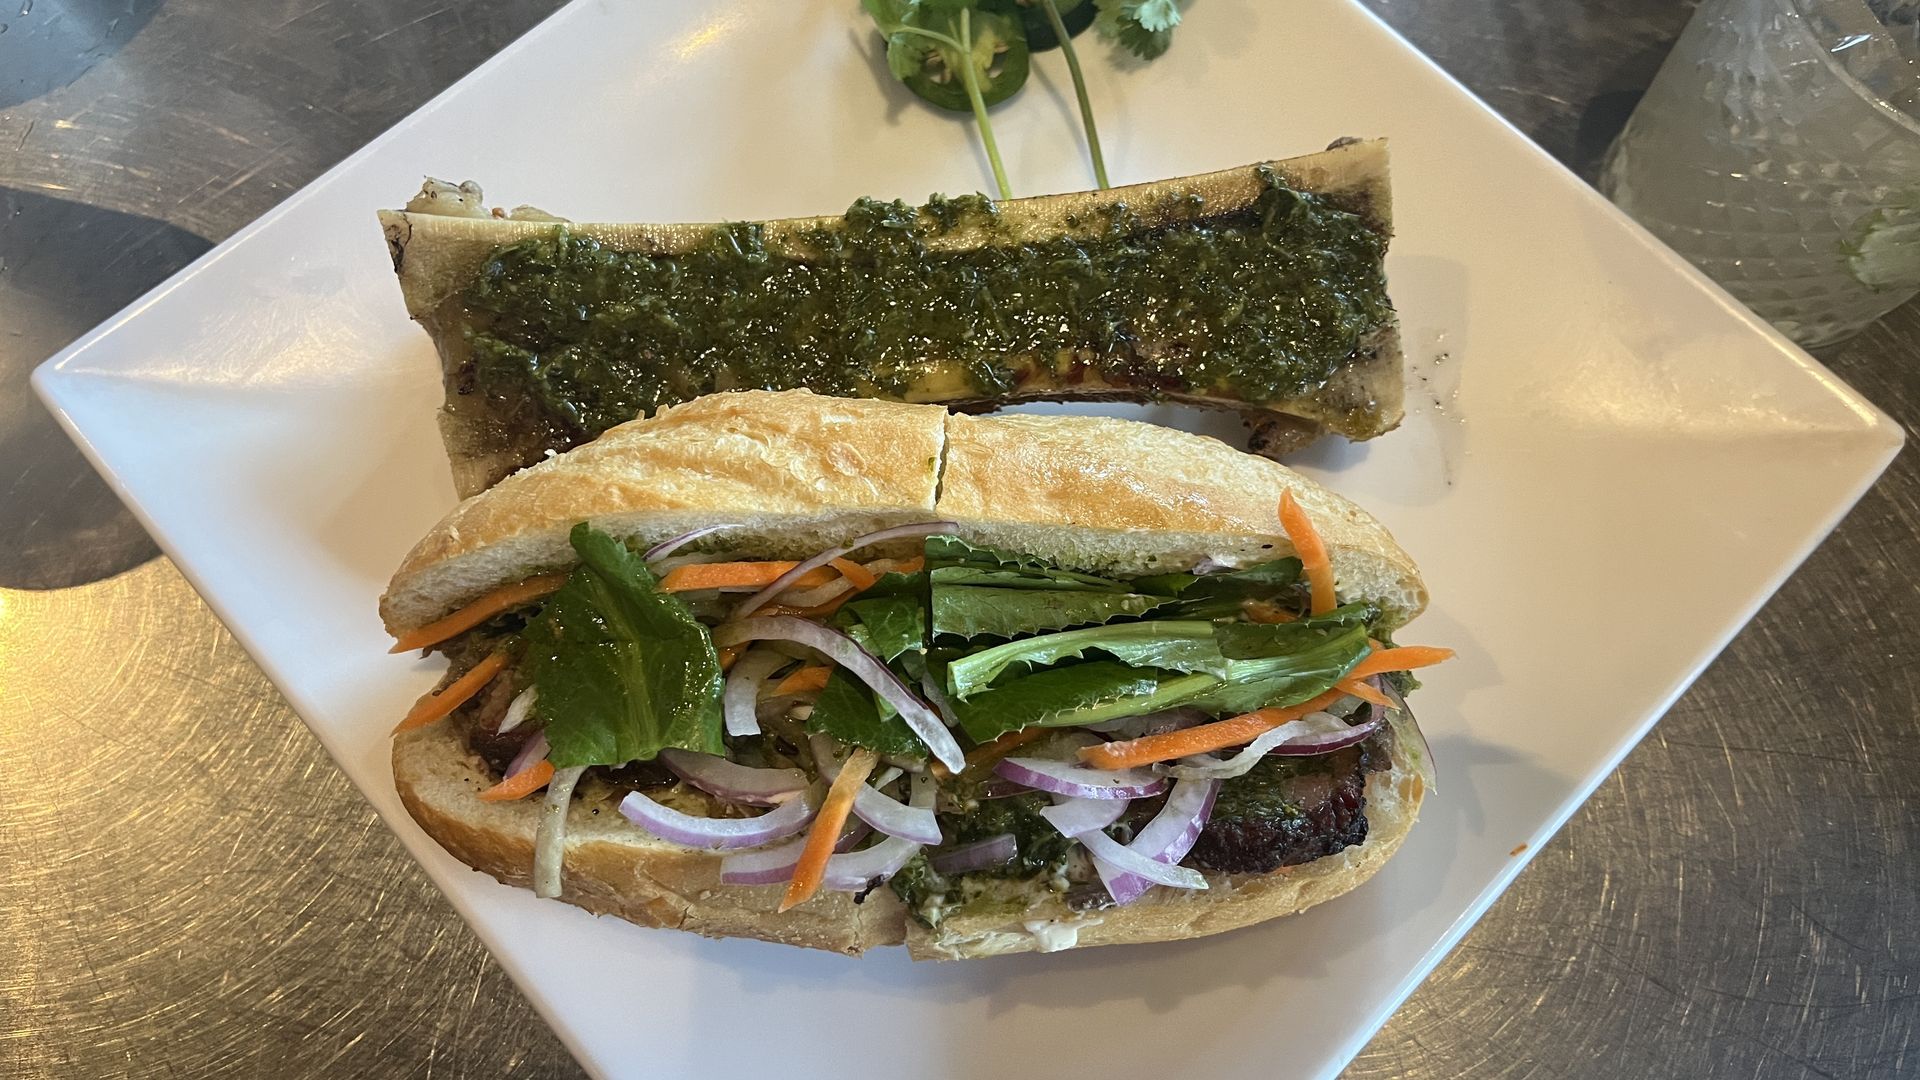 A banh mi topped with carrots, red onion and lettuce sits on a plate next to a bone marrow topped with chimichurri and cilantro and jalapeños on the side.